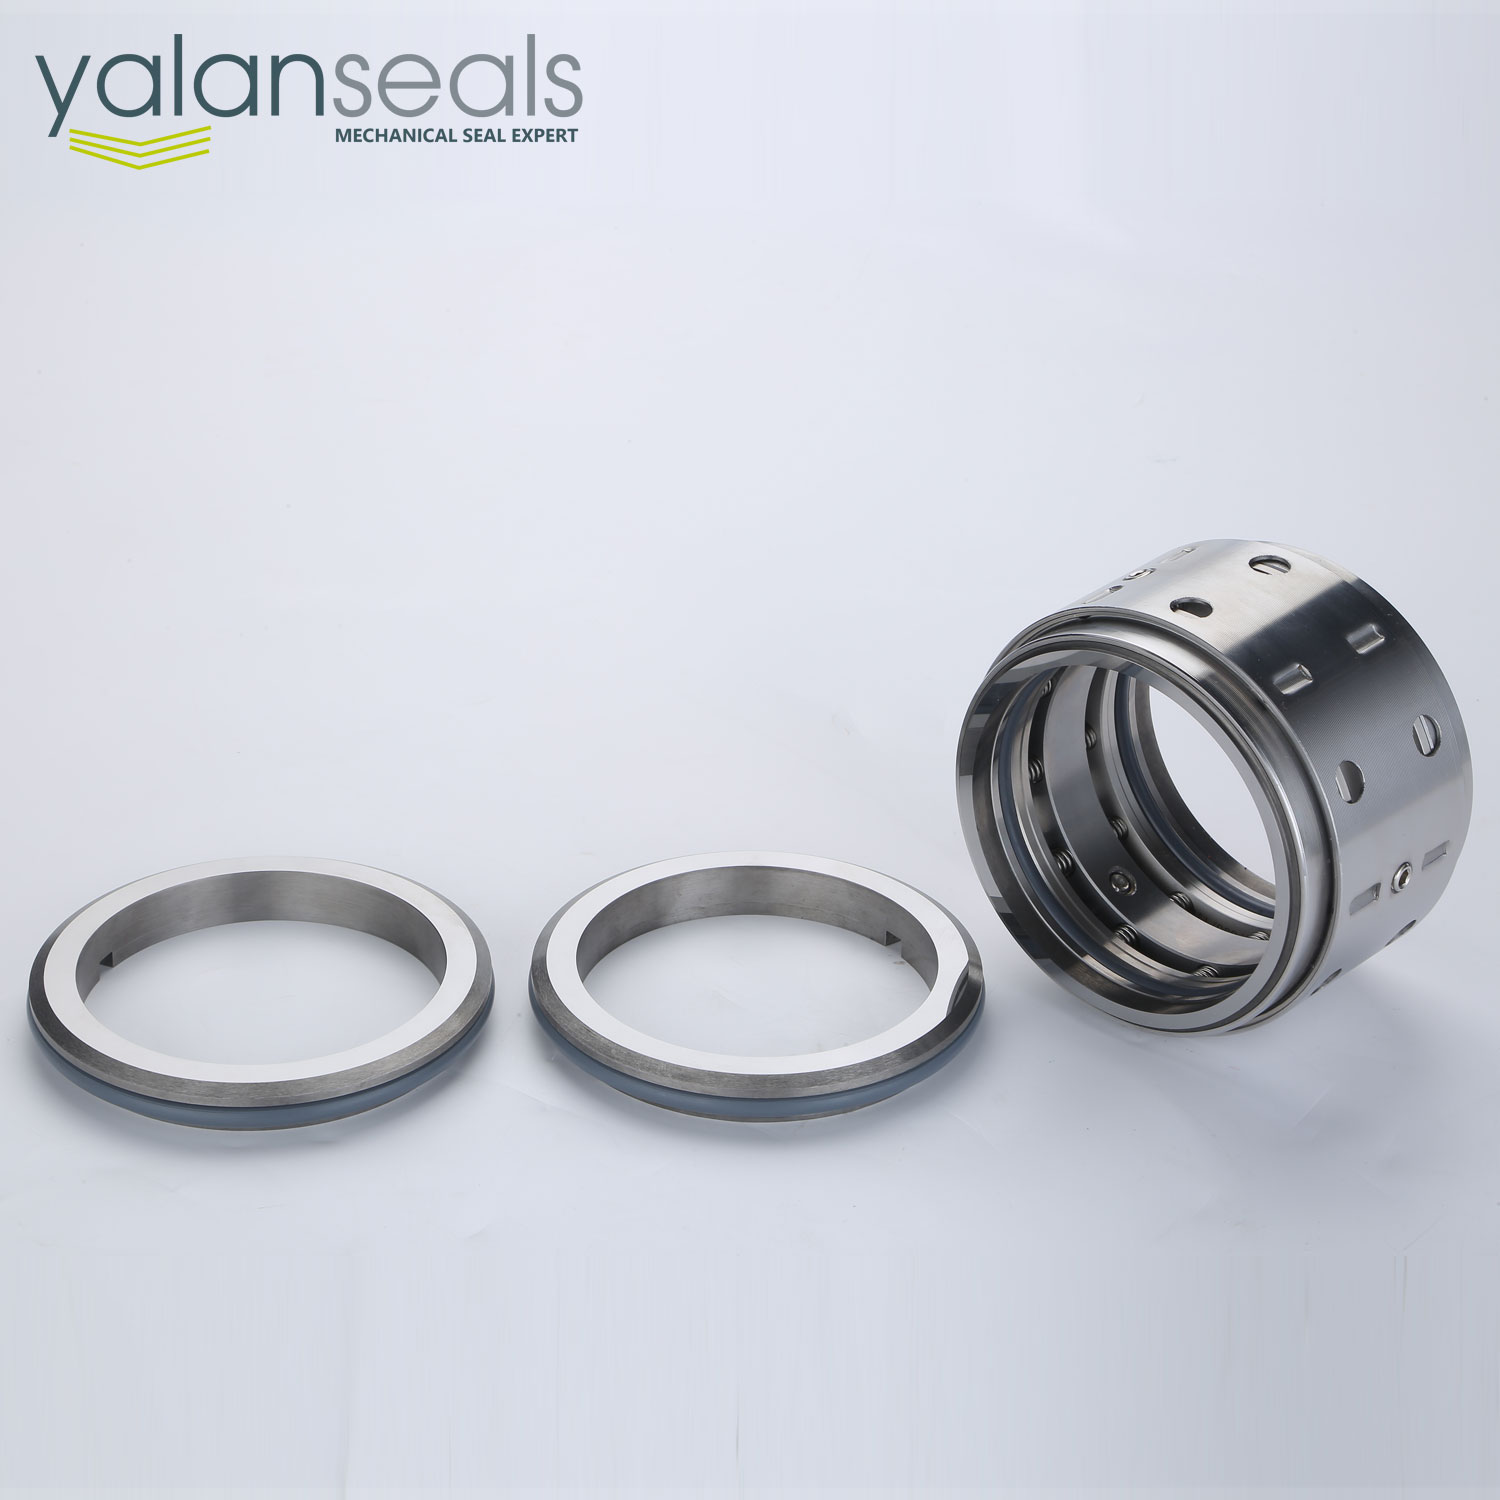 MN206 Mechanical Seal for Slurry Pumps and Desulphurization Pumps